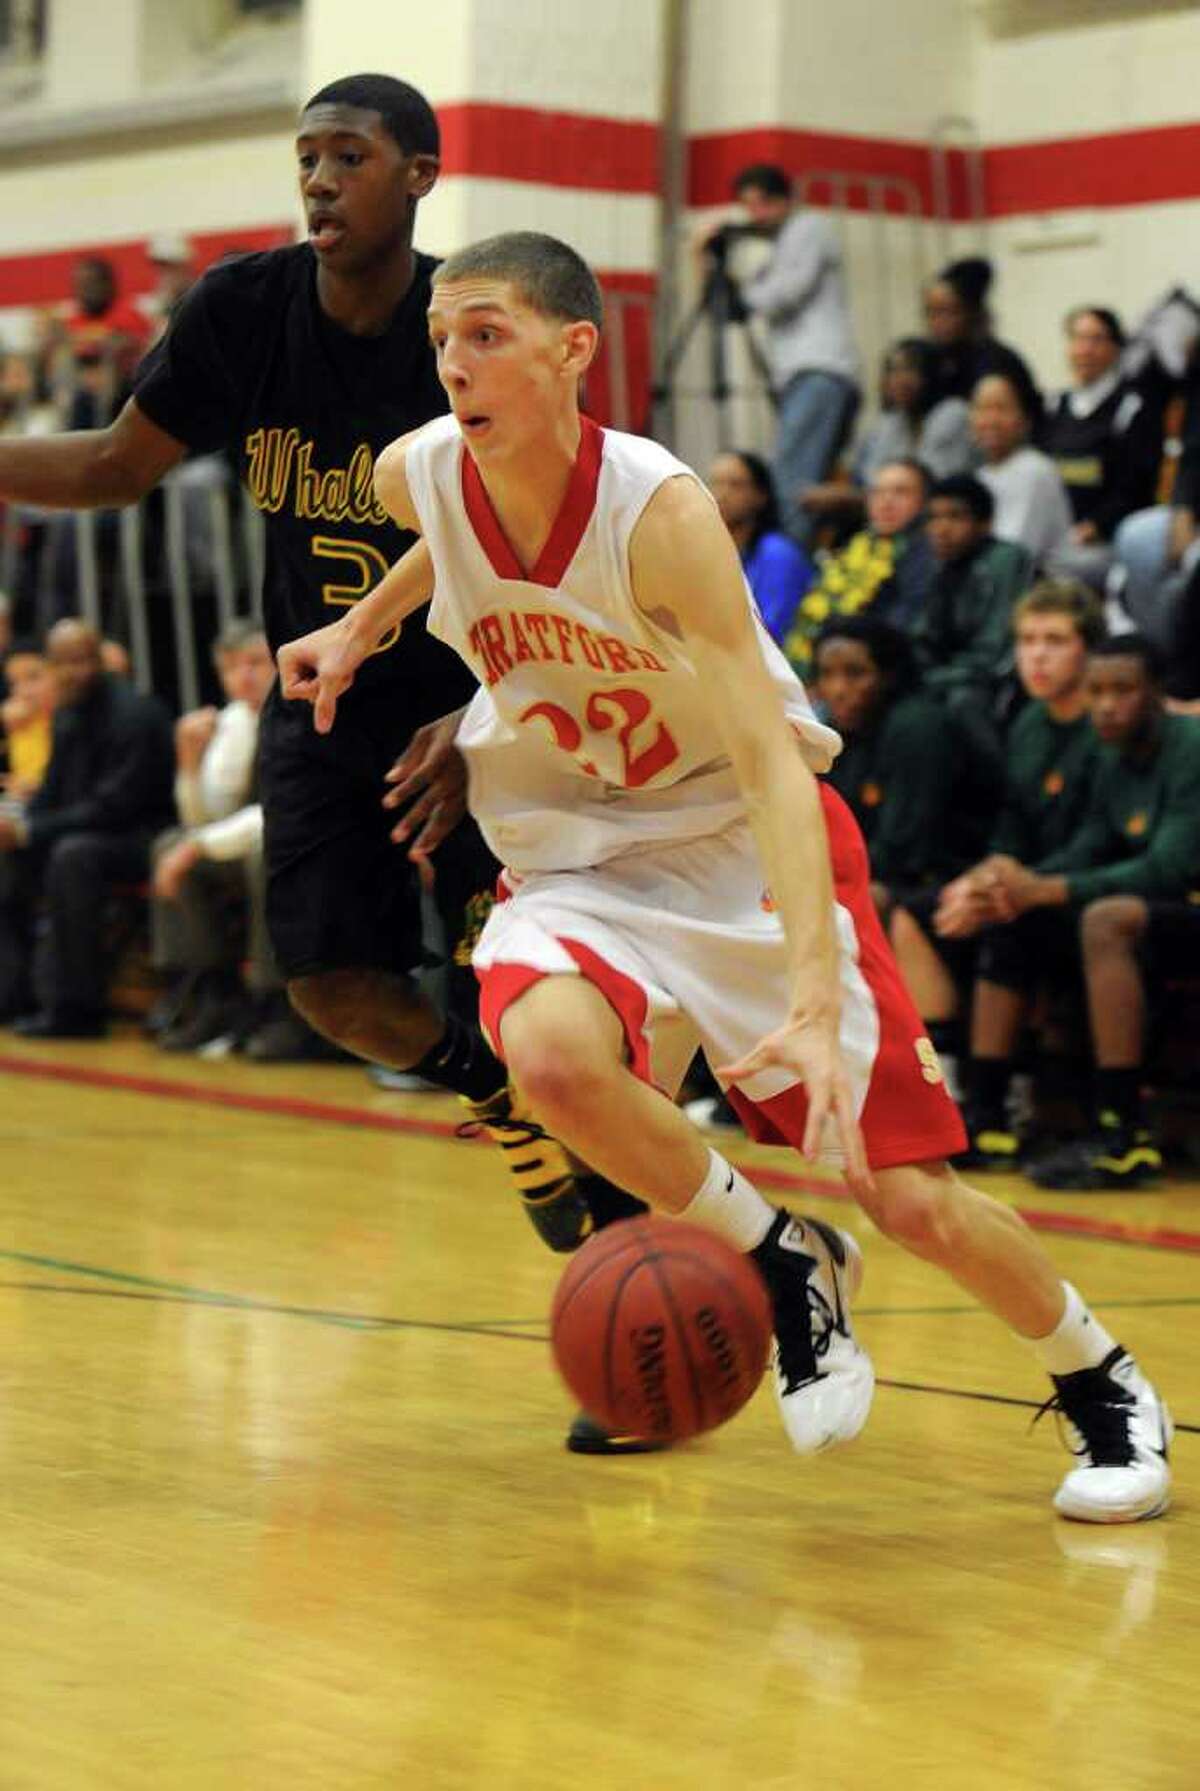 Stratford's Tom Bajda controls the ball during Wednesday's game against New London at Stratford High School on December 15, 2010.